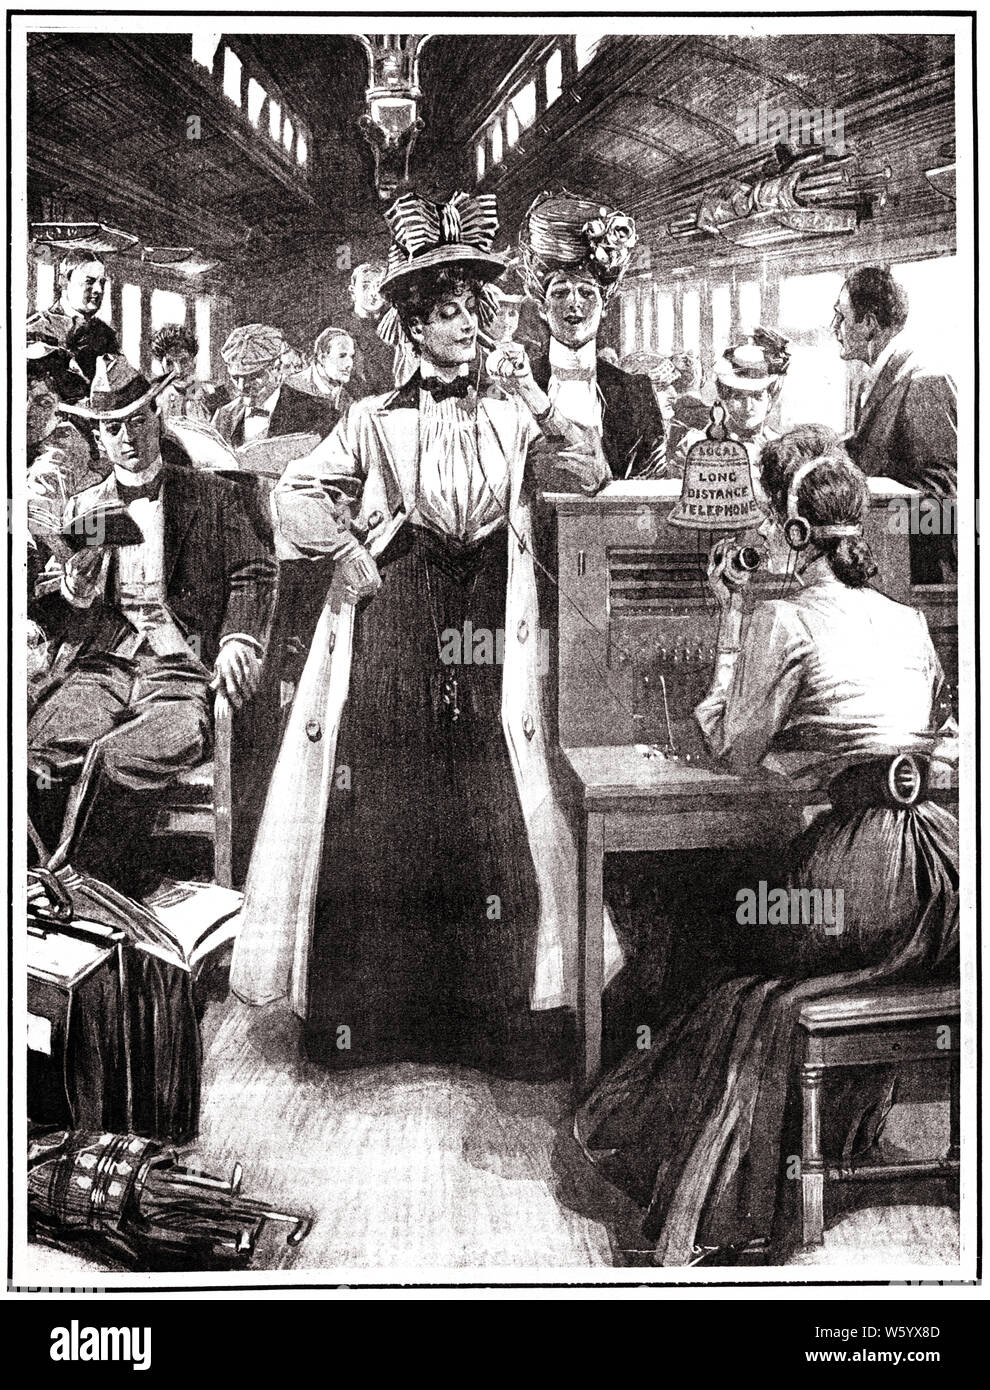 1890s 1900s ILLUSTRATION WOMAN CALLING ON TELEPHONE RIDING ON EXPRESS PASSENGER TRAIN RAILROAD CAR - o5545 CPC001 HARS STYLE COMMUNICATION YOUNG ADULT TECHNOLOGY TEAMWORK INFORMATION VACATION RAILROAD FASHIONABLE JOY LIFESTYLE HISTORY CALL FEMALES PASSENGERS HEALTHINESS LUXURY PASSENGER FRIENDSHIP FULL-LENGTH LADIES PERSONS MALES SPEAK CALLING TRANSPORTATION B&W SWITCHBOARD SUCCESS RAIL HAPPINESS OPERATOR CONTACT LEISURE STYLES STRATEGY CUSTOMER SERVICE NETWORKING EXCITEMENT KNOWLEDGE PROGRESS RECREATION VOICE INNOVATION AUTHORITY HOLIDAYS HIGH TECH CONNECTION 19TH CENTURY CONNECTED TELEPHONES Stock Photo